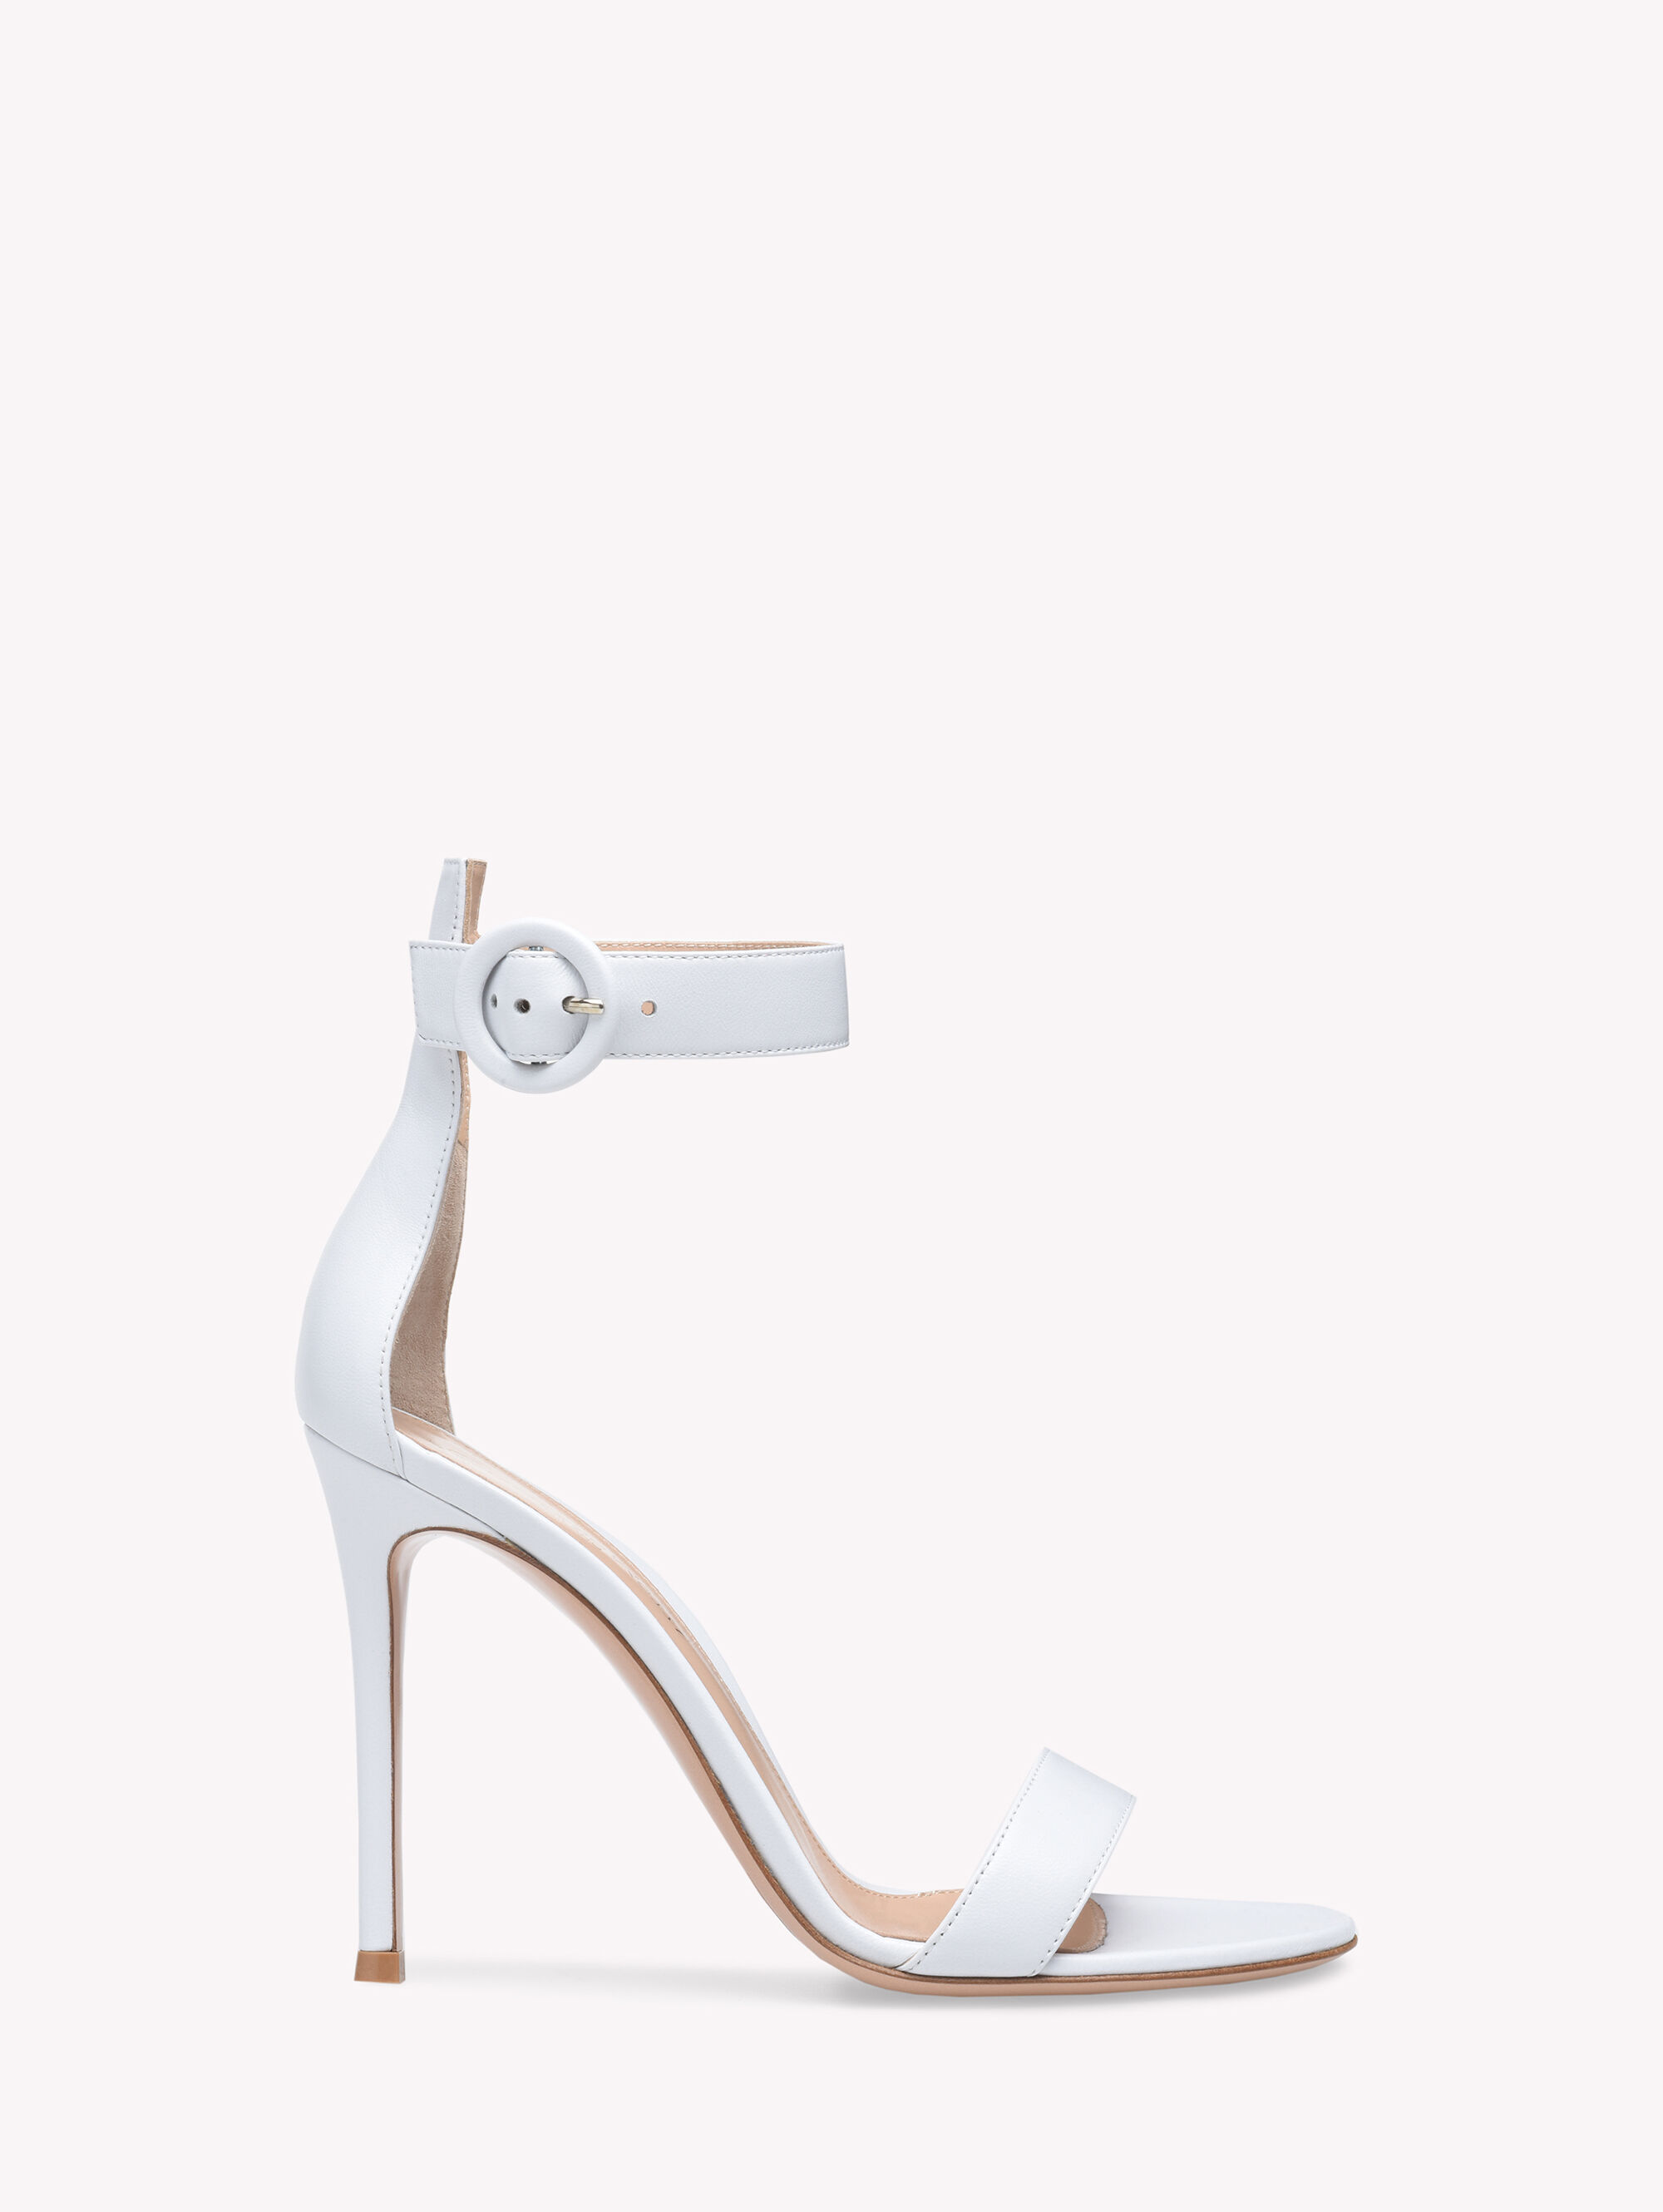 GIANVITO ROSSI 70 leather sandals | NET-A-PORTER